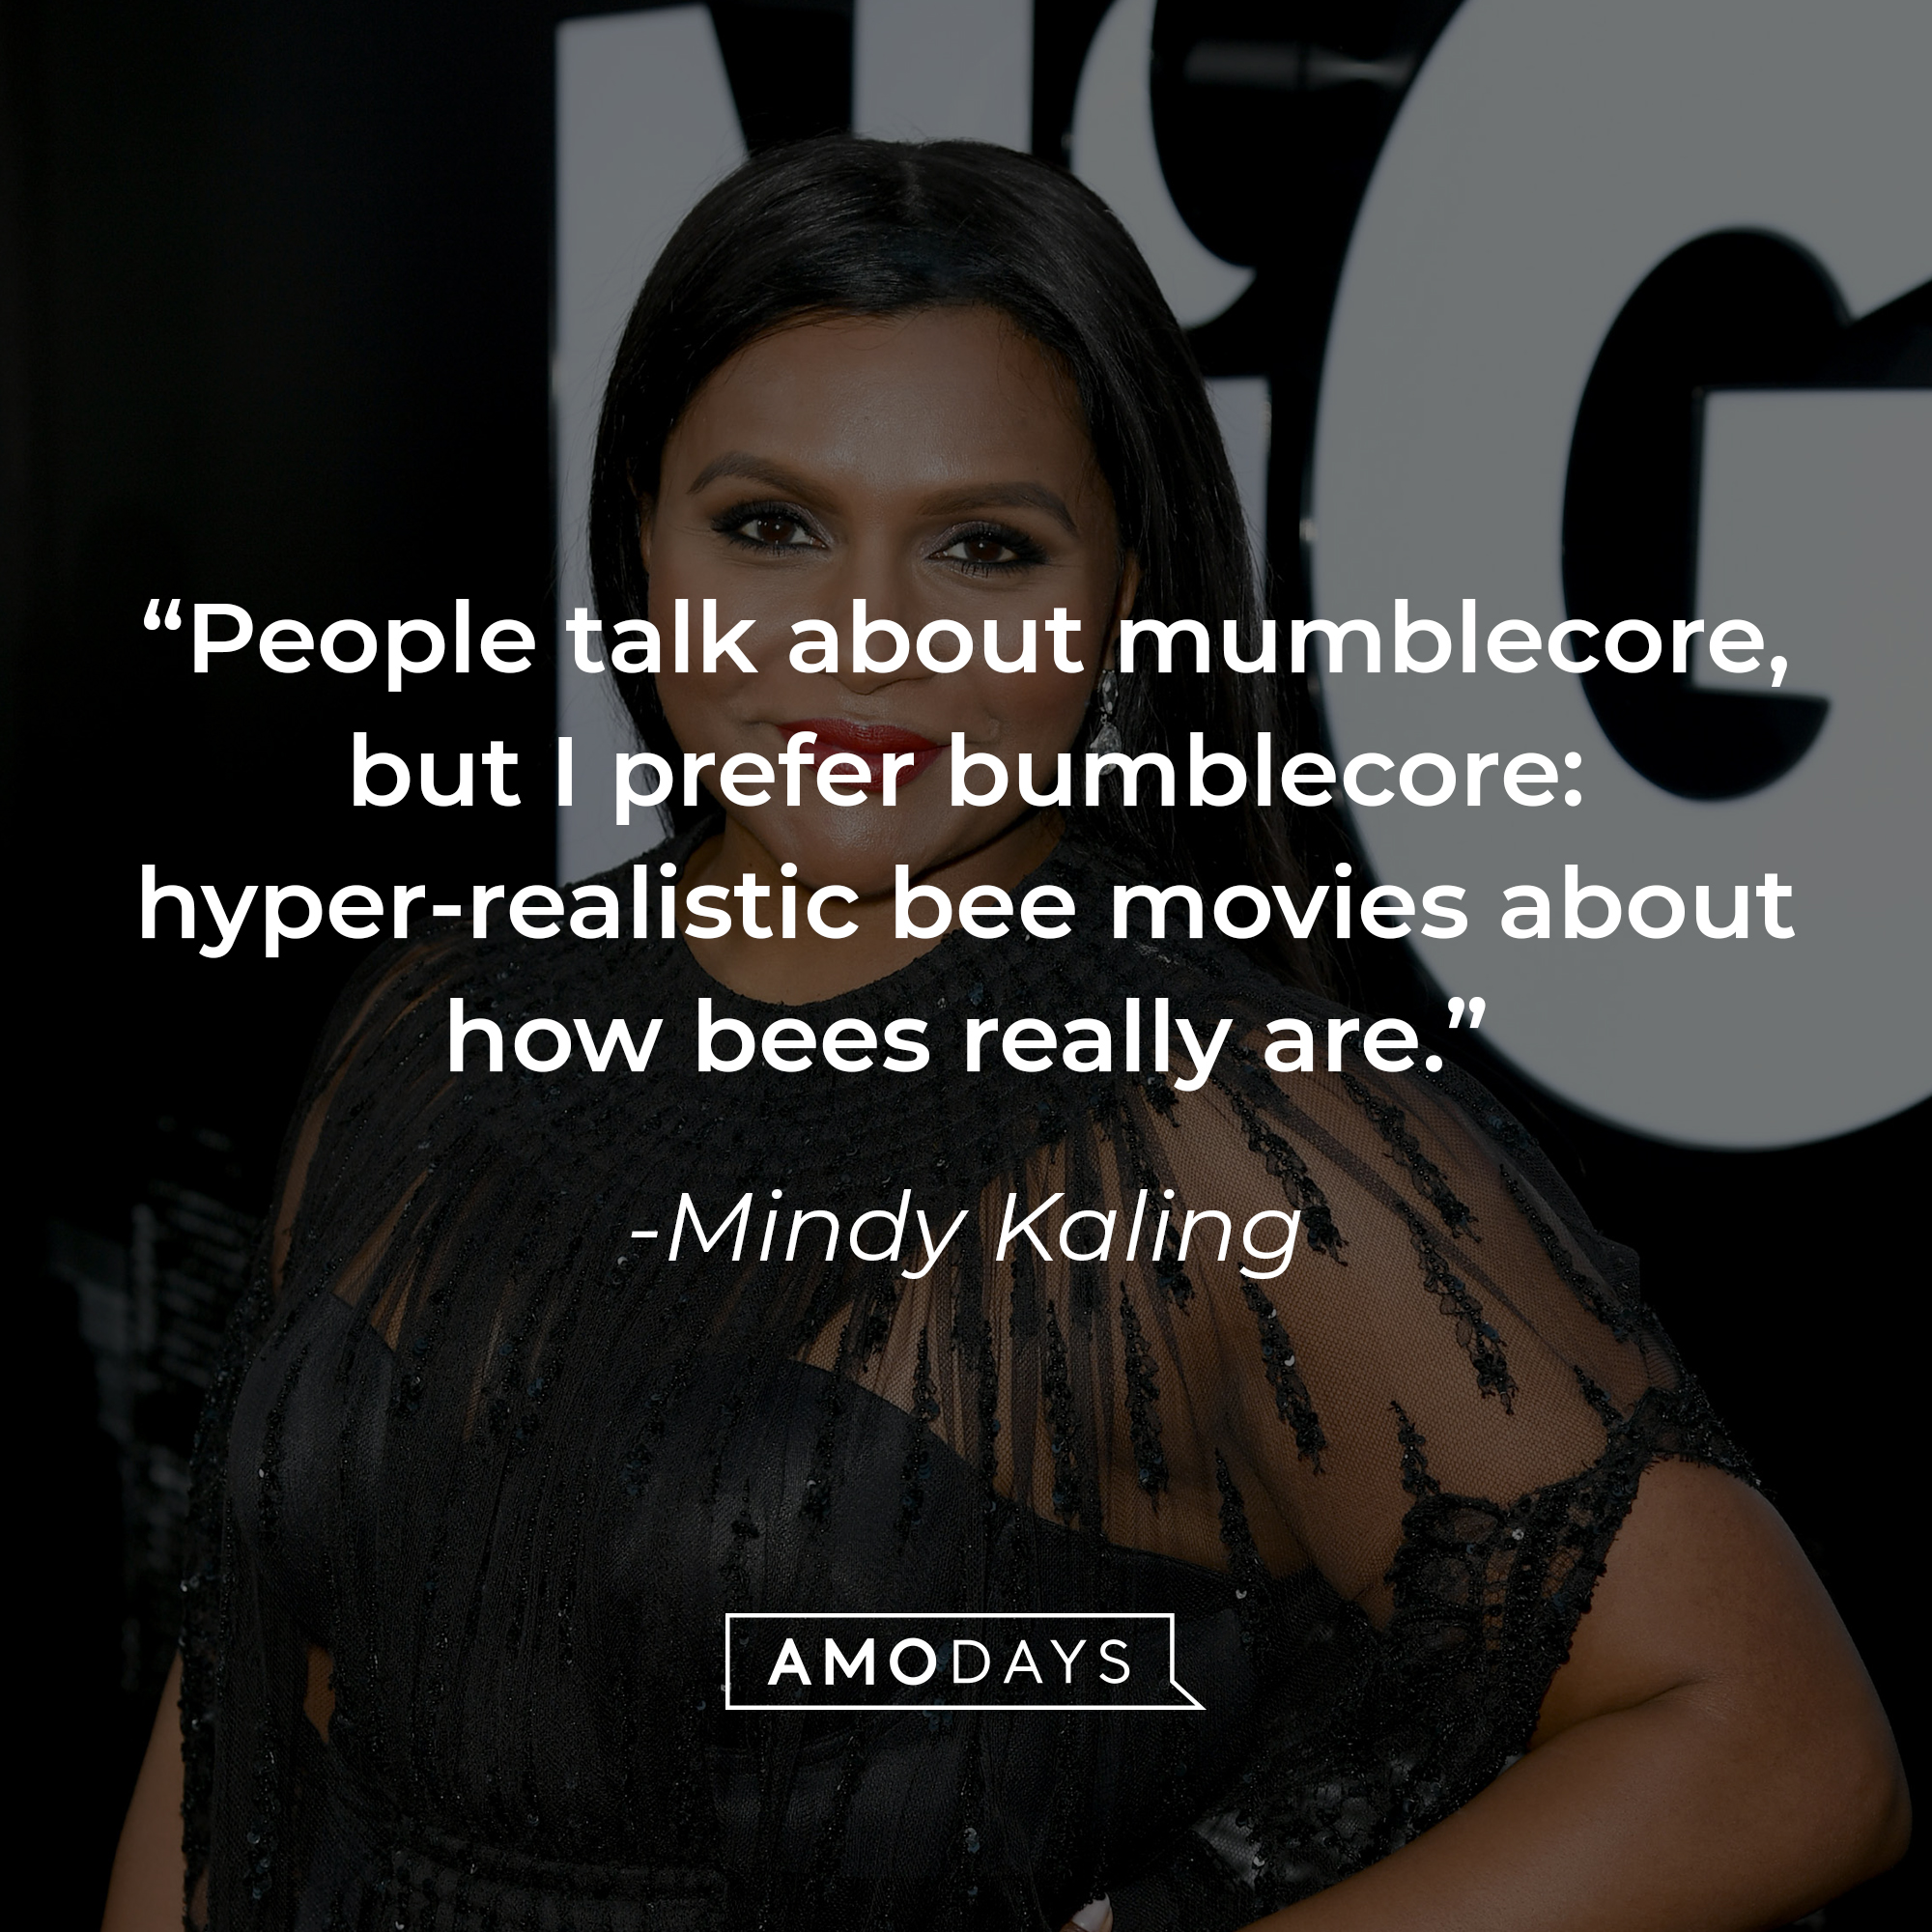 Mindy Kaling's quote: "People talk about mumblecore, but I prefer bumblecore: hyper-realistic bee movies about how bees really are." | Source: Getty Images